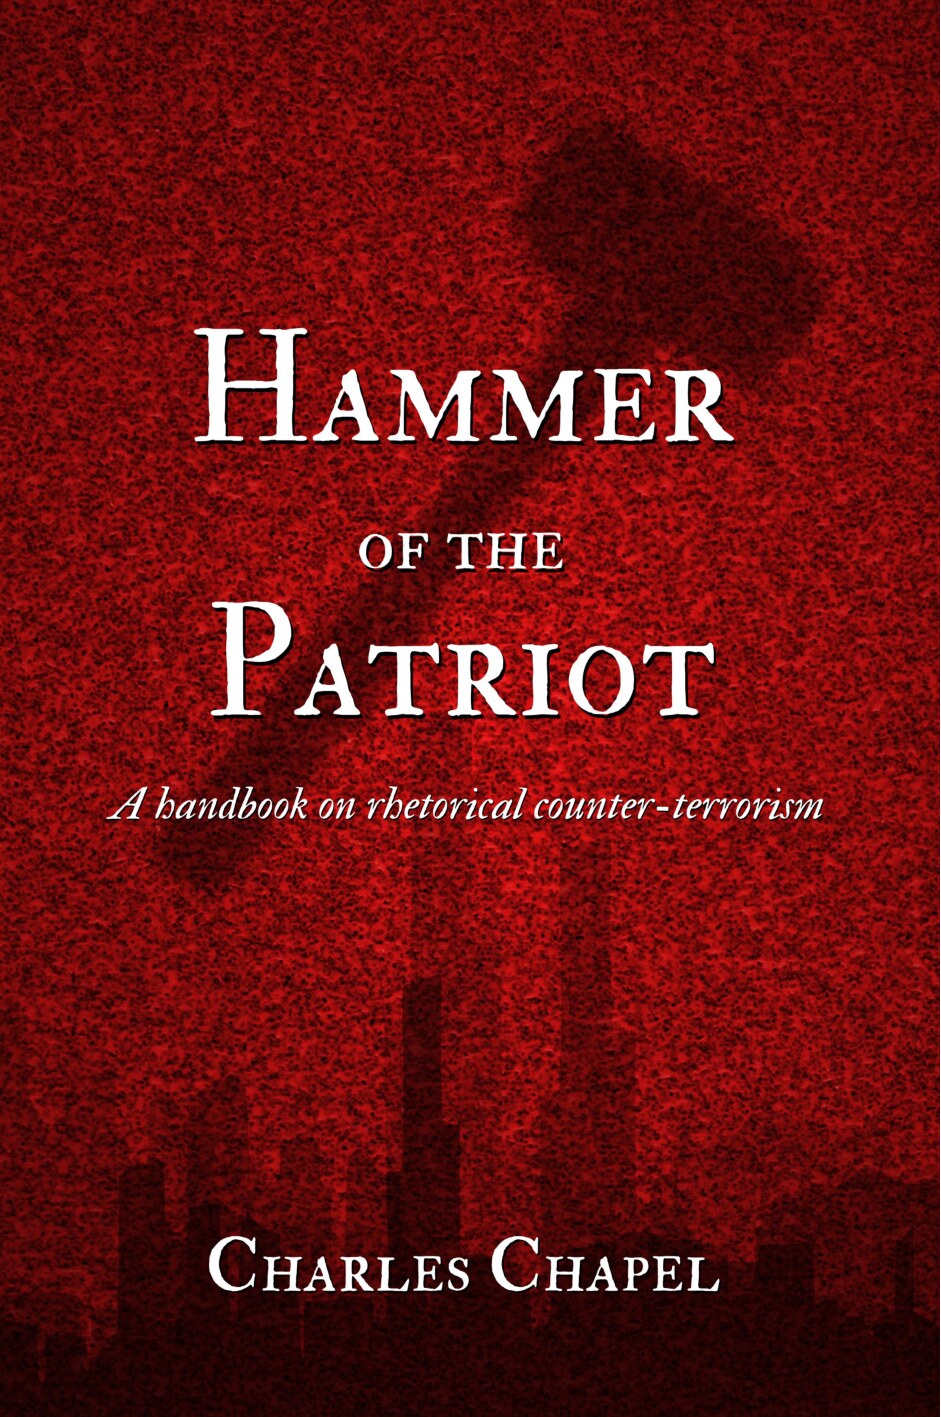 Hammer of the Patriot